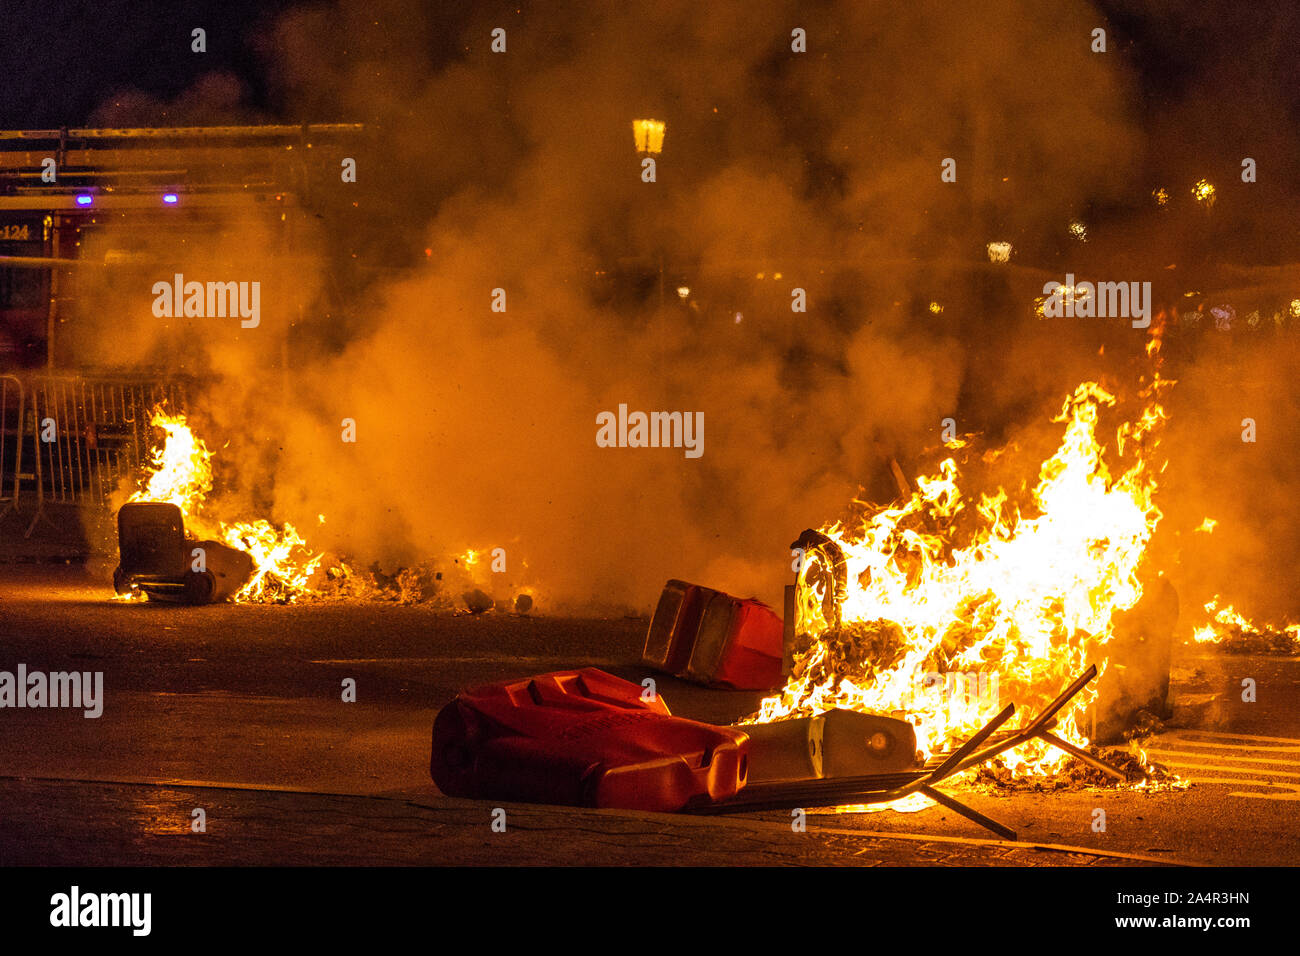 Barcelona, Spain - October 16, 2019: Fire on the main square of Barcelona as part of the protests again the prison sentence to catalan leaders for organizing the independence referendum Credit: Dino Geromella/Alamy Live News Stock Photo